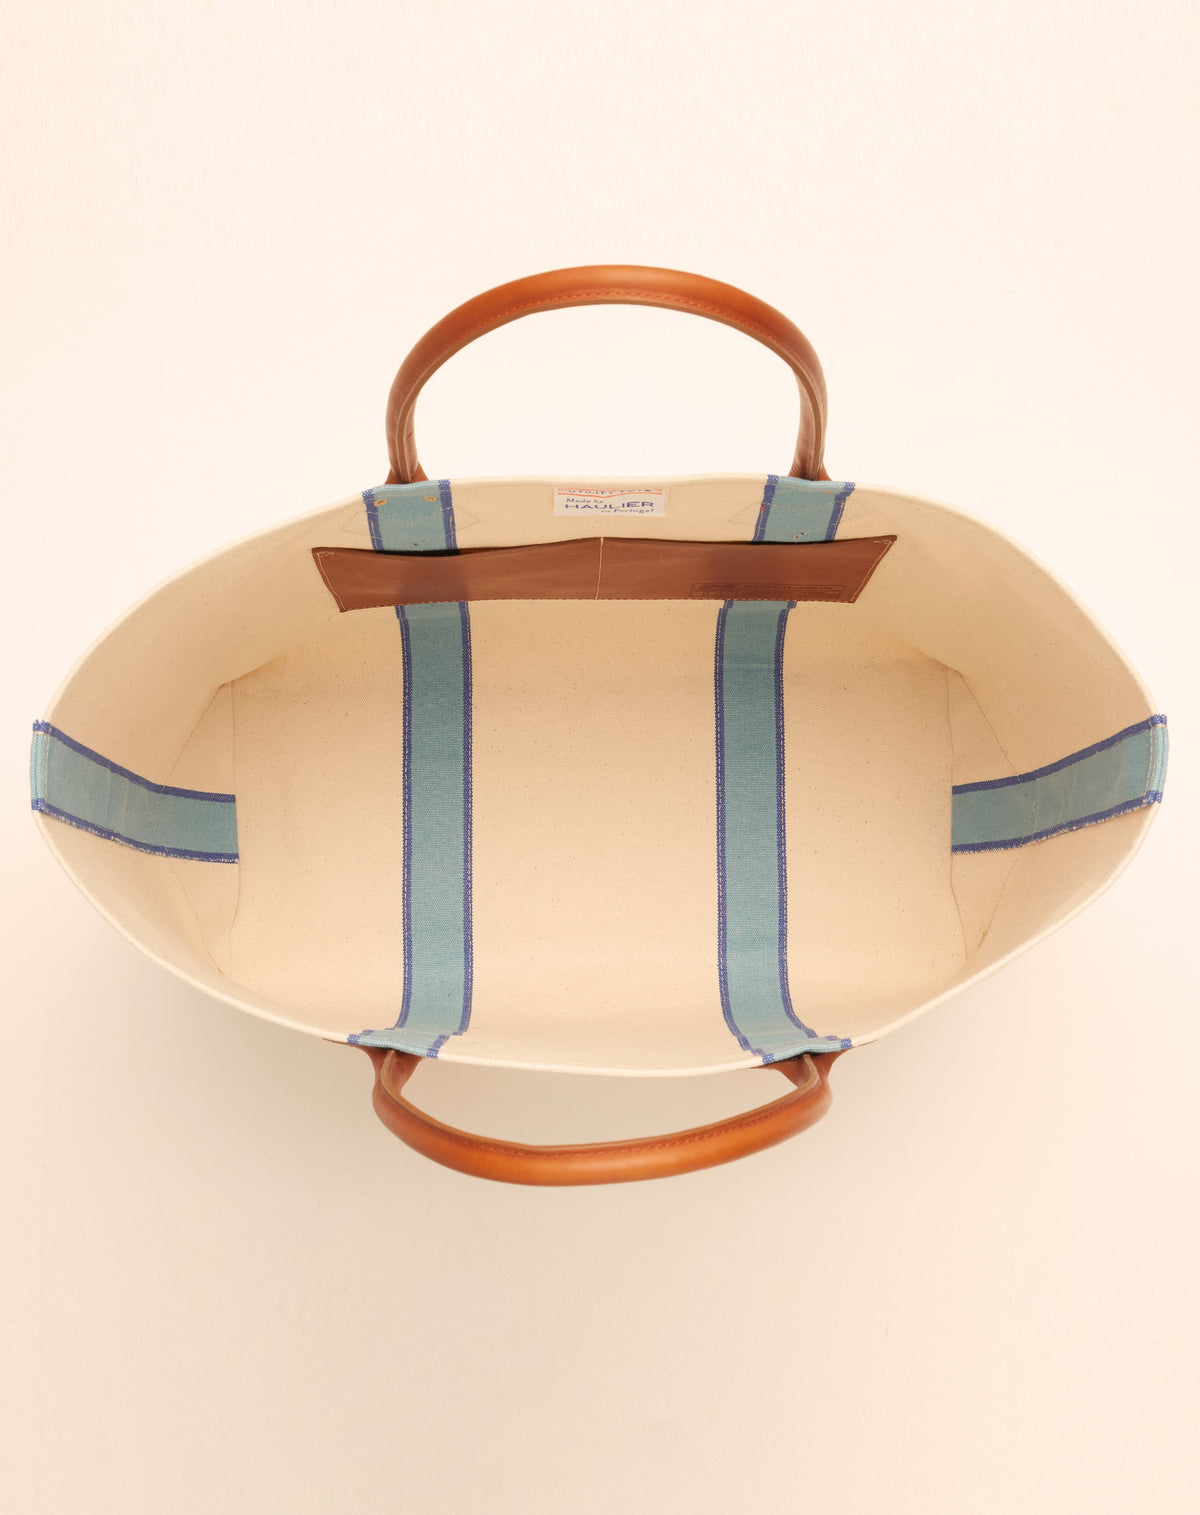 Image of inside of a classic canvas tote bag in natural ecru colour with leather handles and contrasting light blue stripes inside.